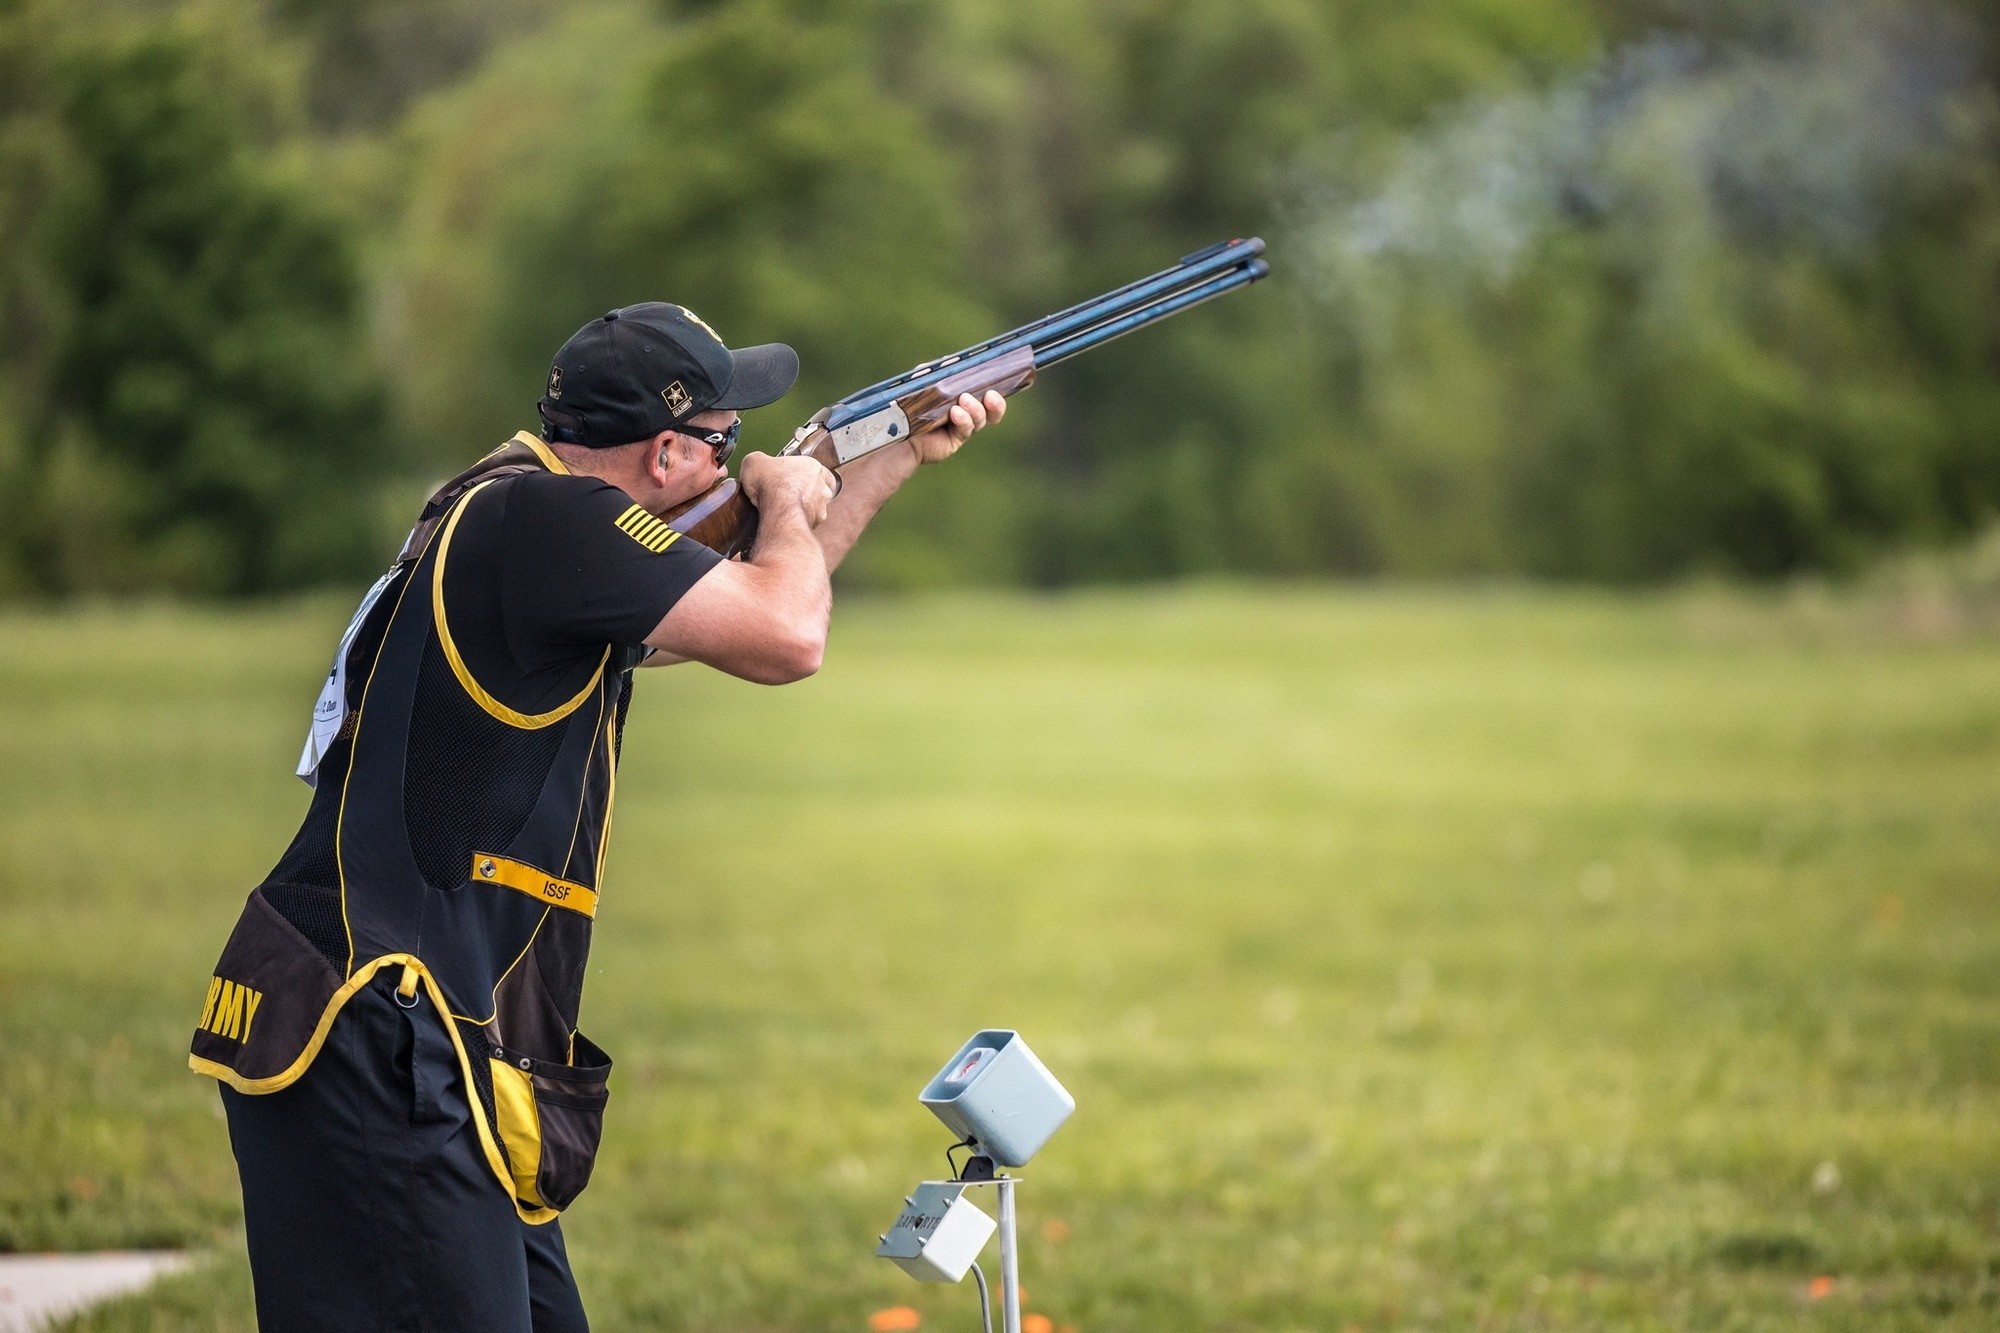 Two Us Army Soldiers Win Bronze Medals At Shotgun Skeet Nationals Article The United States Army